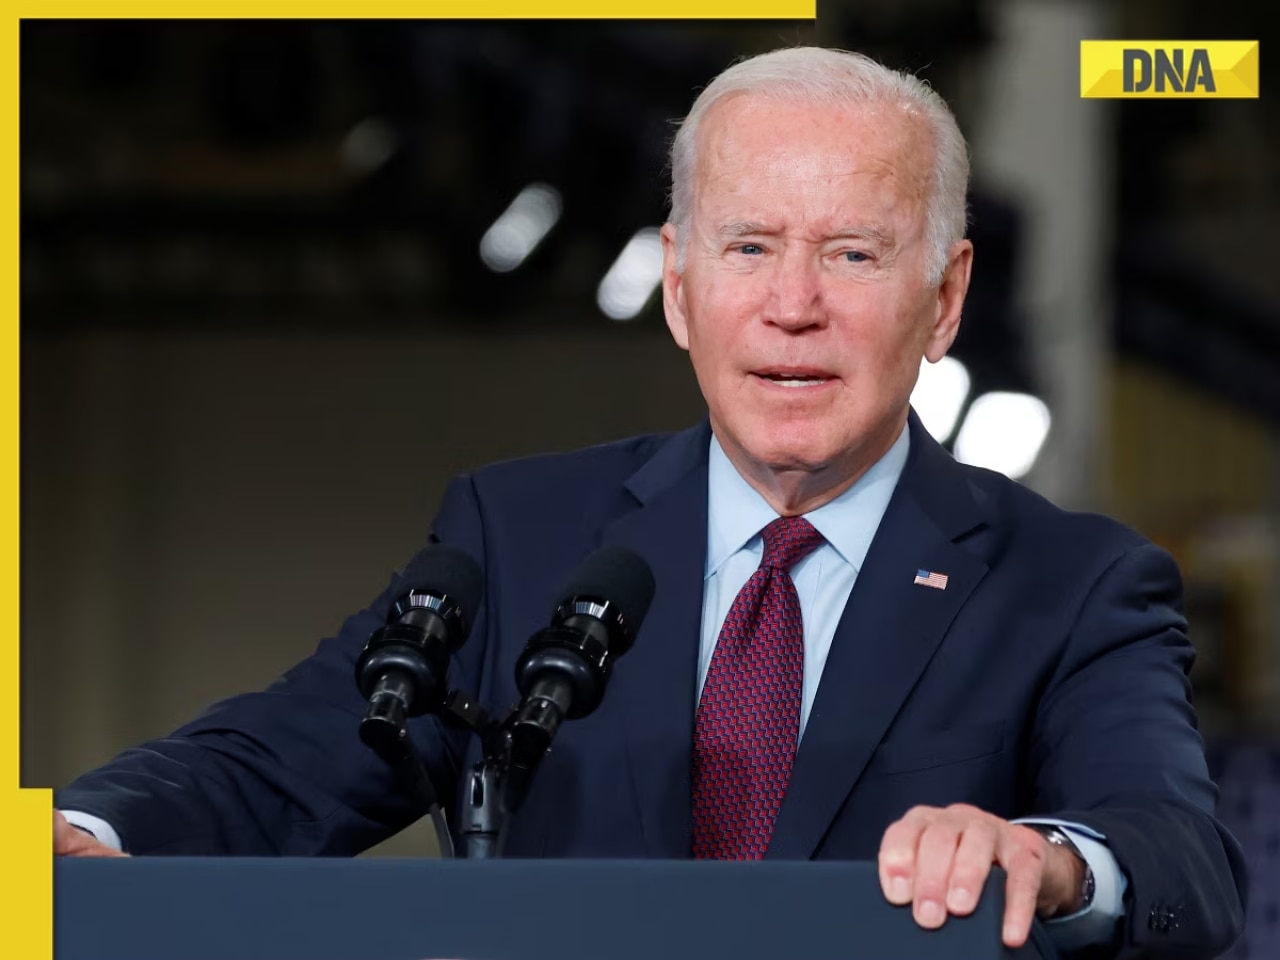 US President Joe Biden tightens border security amid rising immigrations issues, sparks controversy